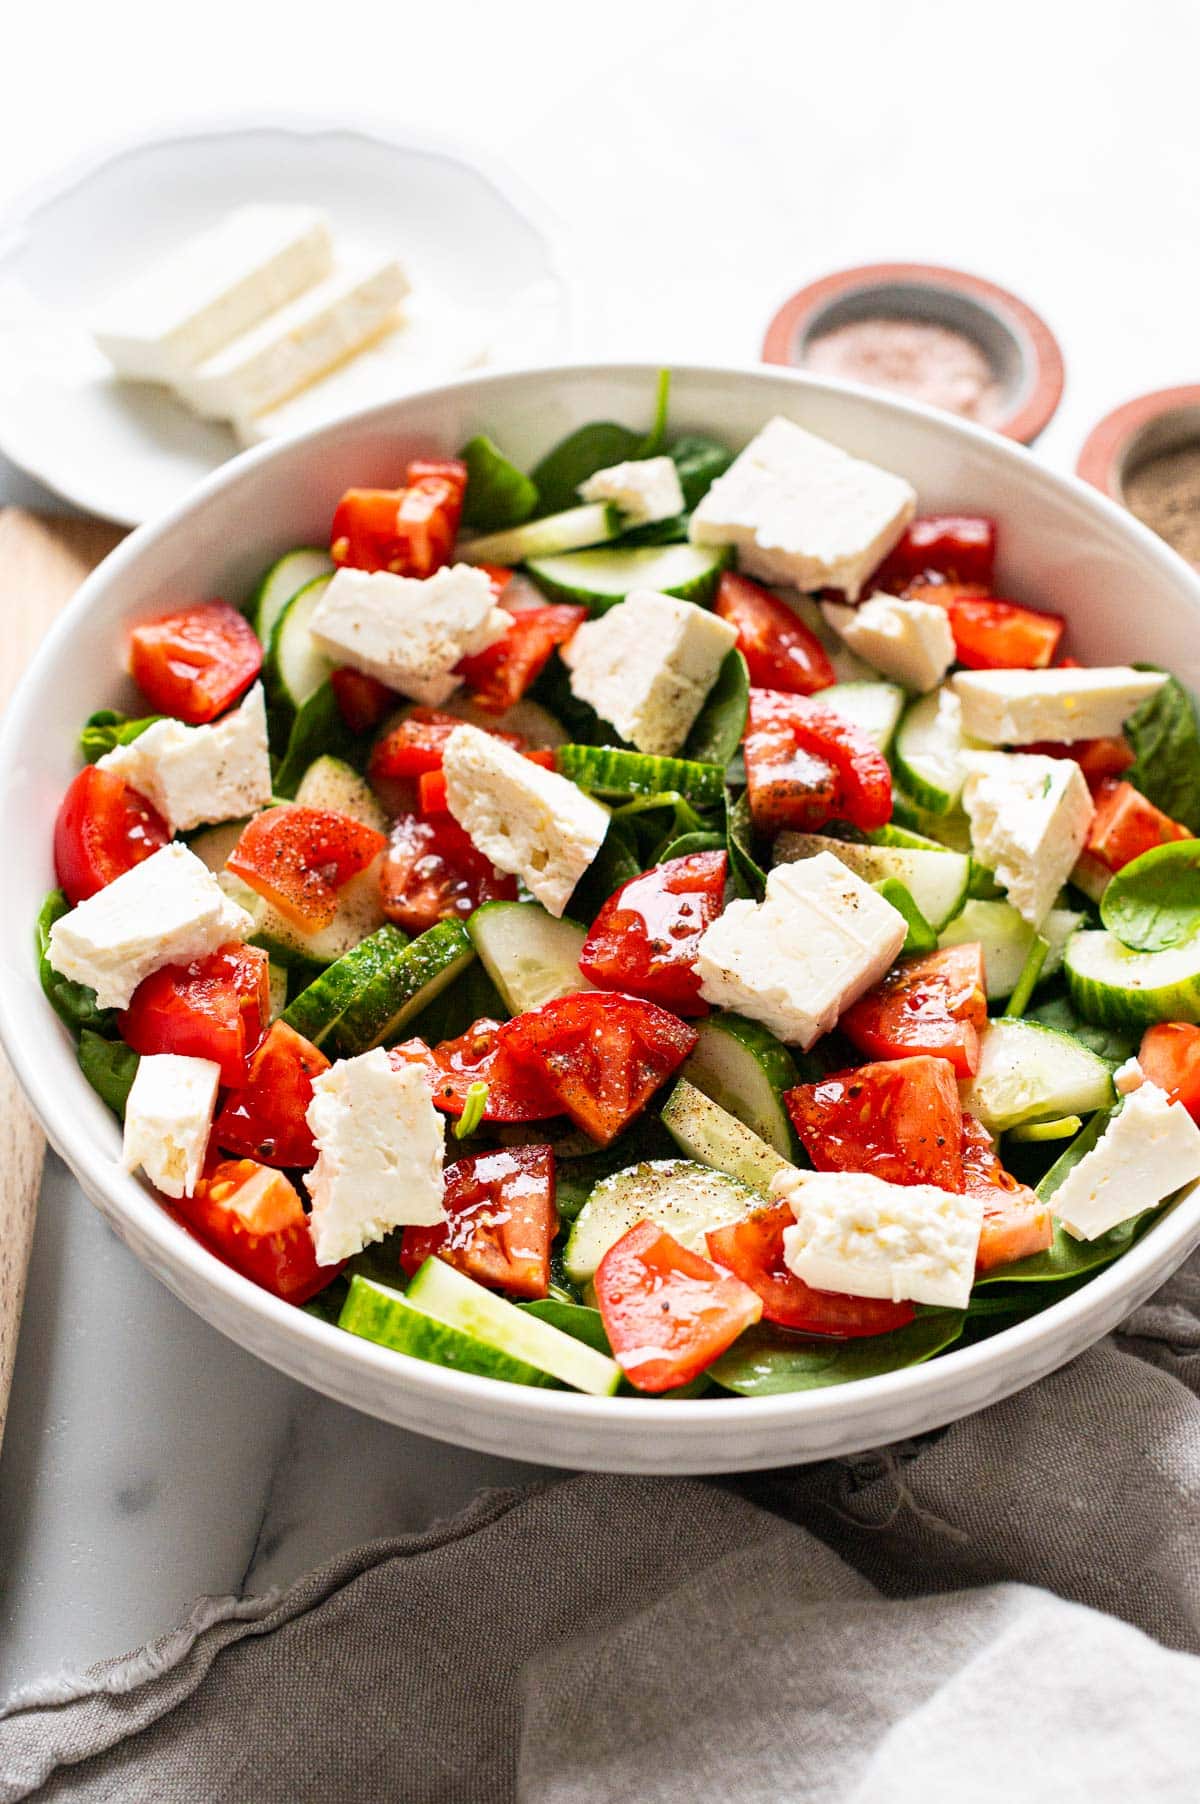 Spinach salad with cucumbers, tomatoes and feta cheese in a bowl.